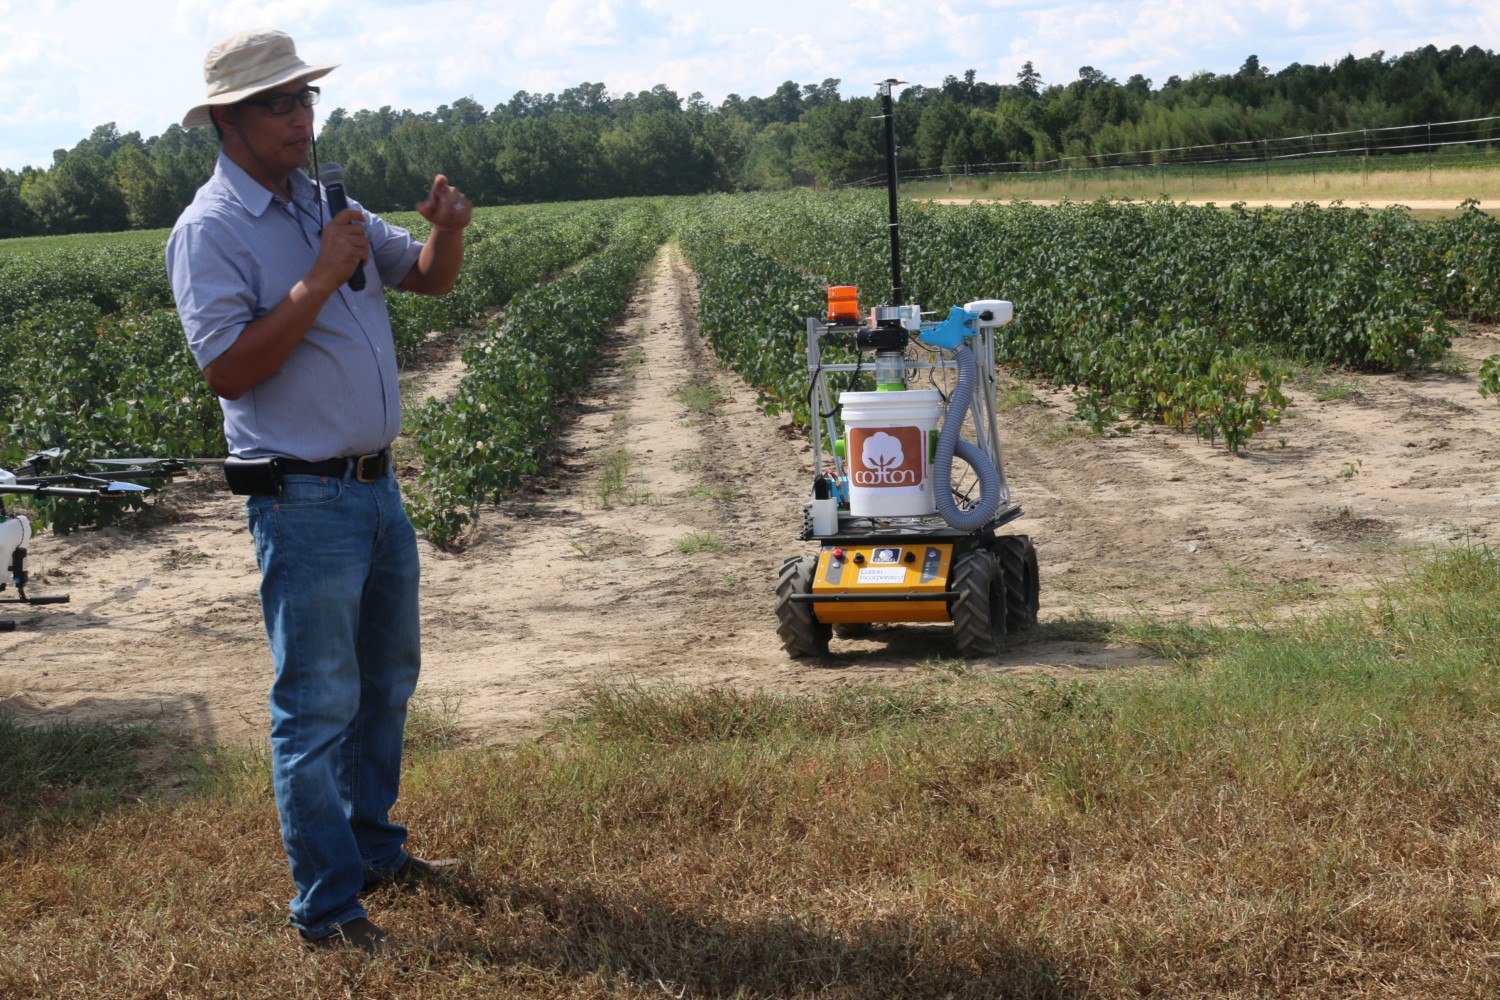 Joe Mari Maja, a researcher at Clemson's Edisto Research and Education Center, believes Unmanned Ground Vehicles (UGVs) can be used to make cotton harvest more efficient.